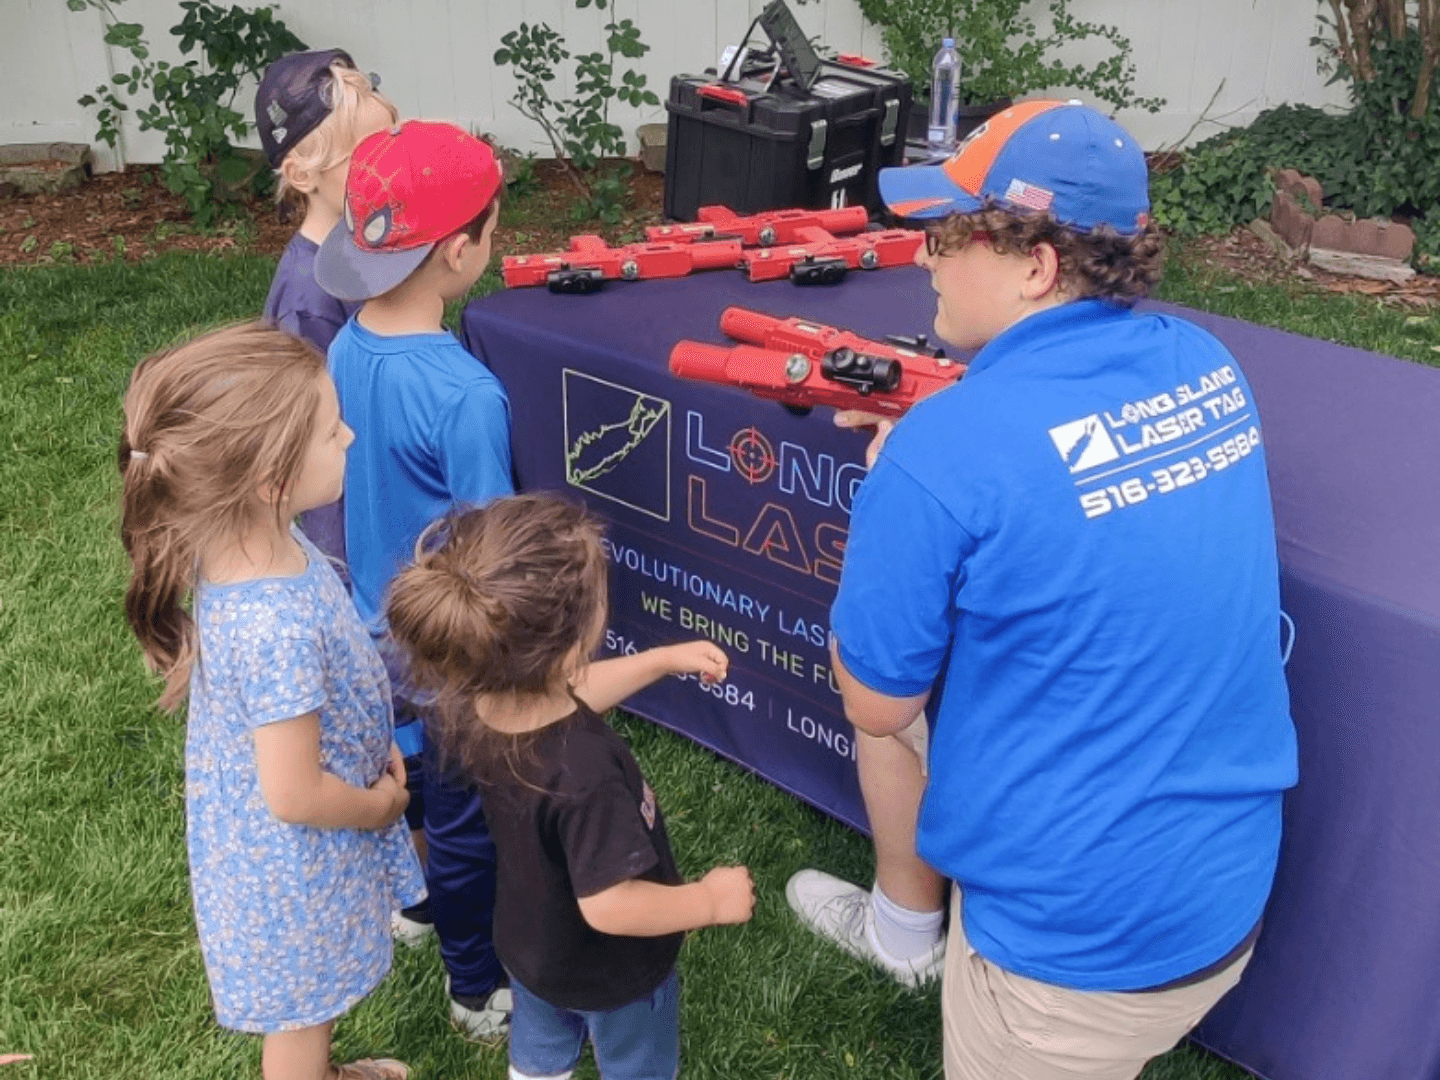 agroup of 4 children being shown how to play laser tag by a staff member from the company long island laser tag